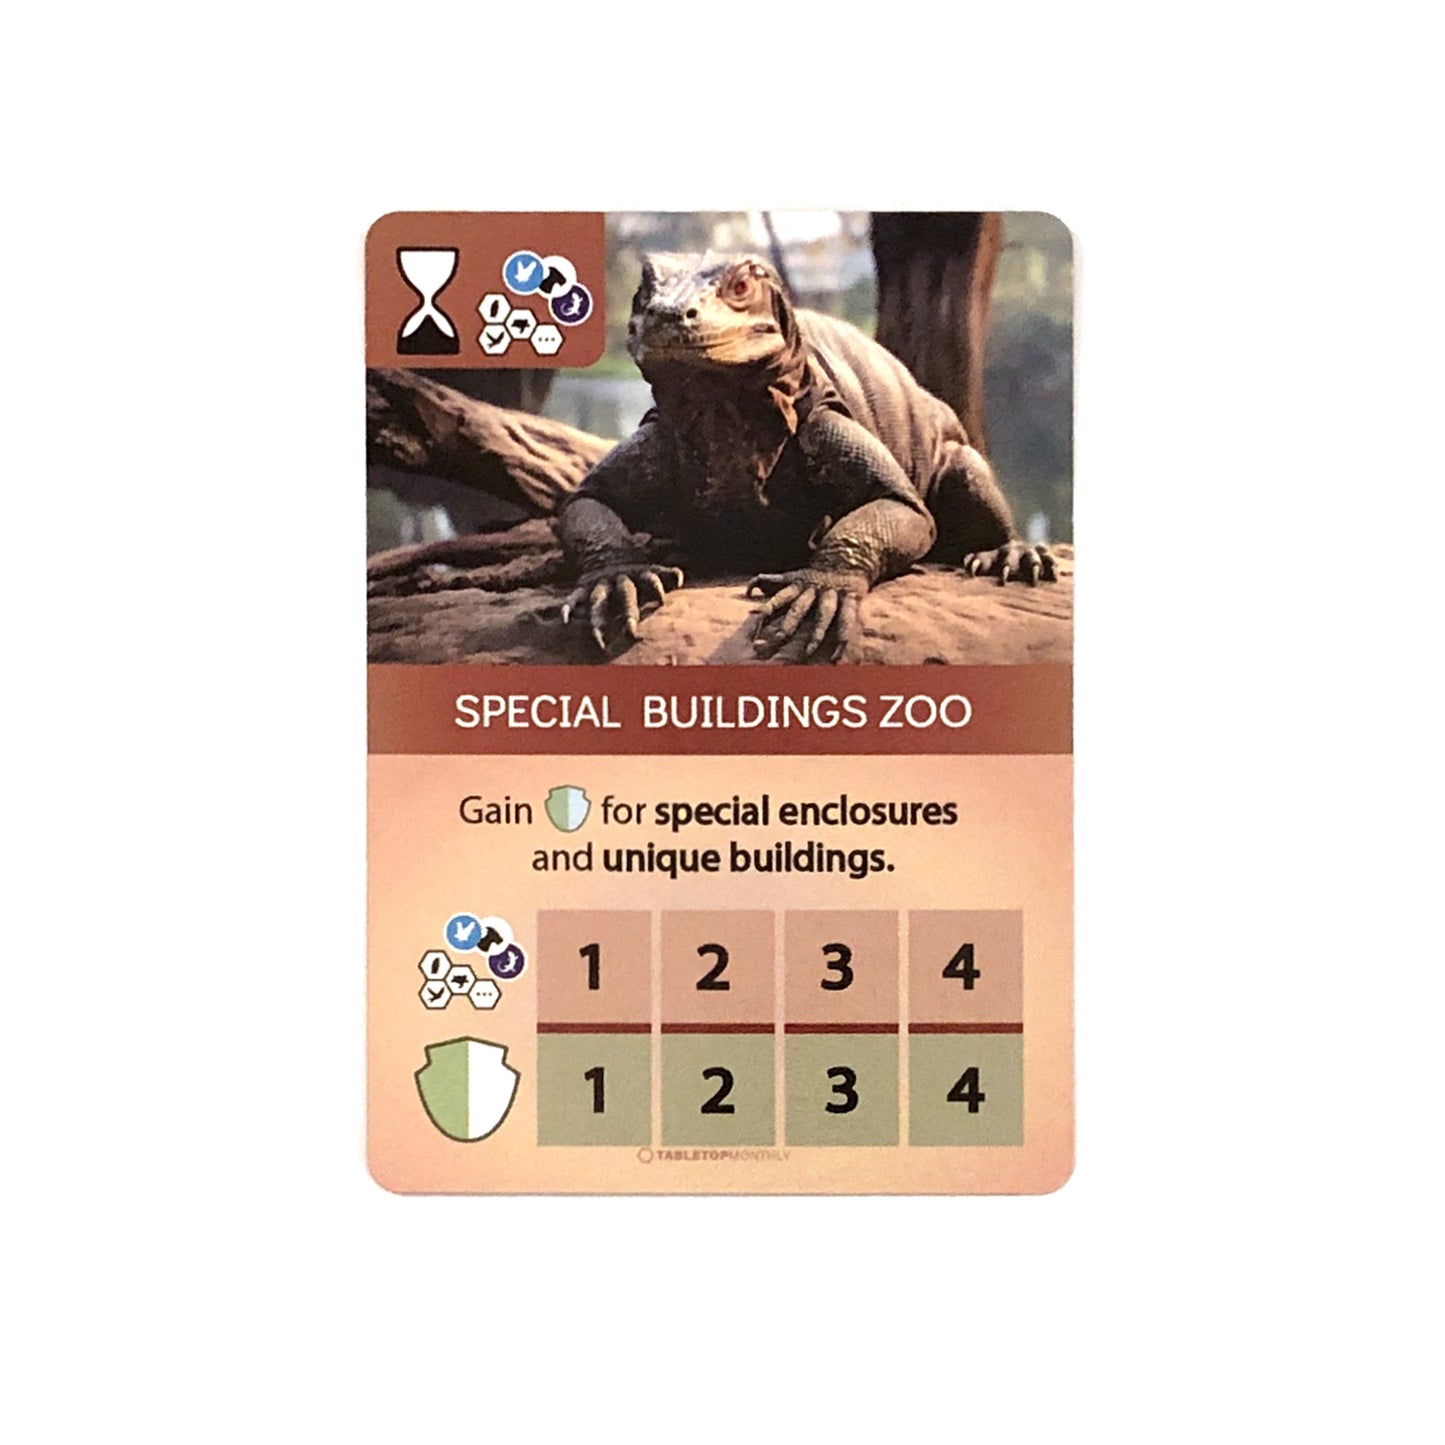 Final Scoring Cards expansion compatible with Capstone Games' Ark Nova